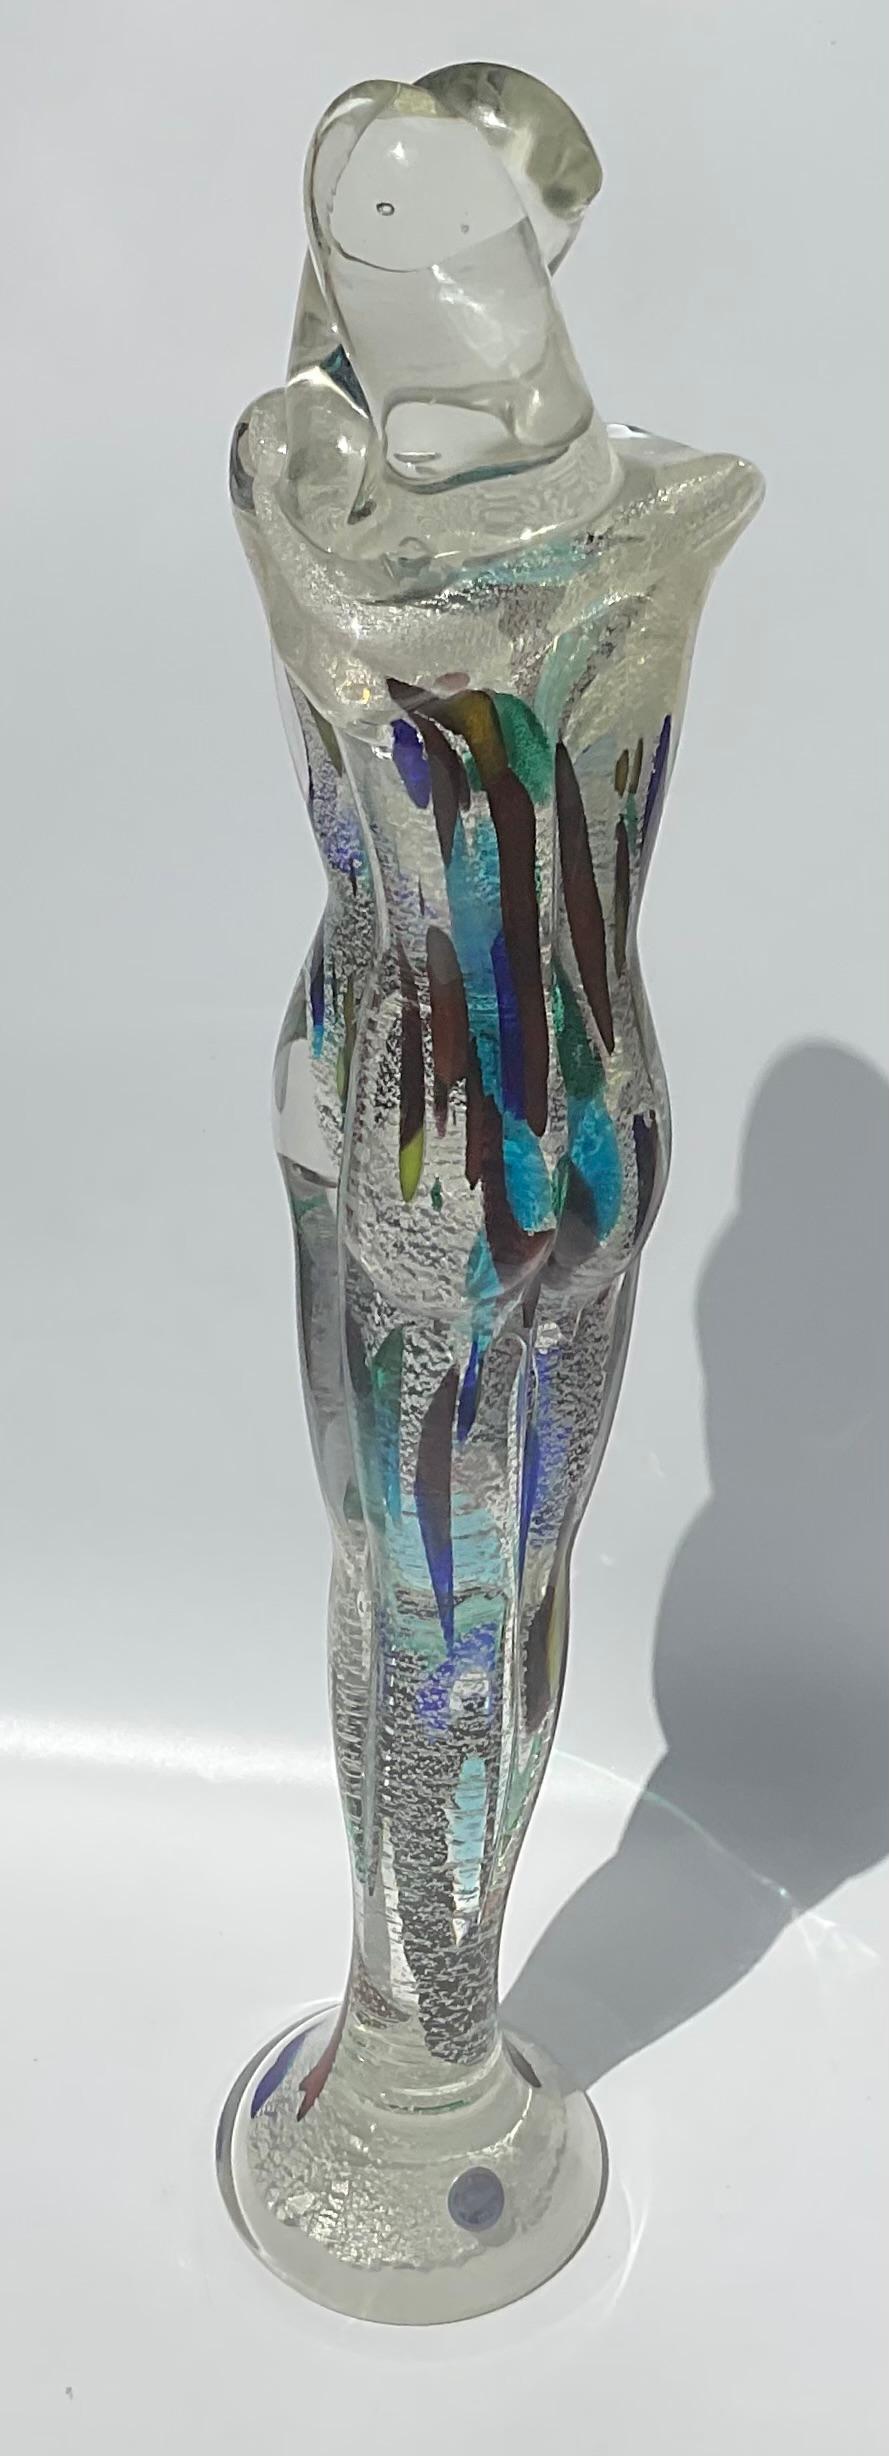 Renato Anatra Murano Art Glass Entwined Lovers Sculpture multi colors with silver encased flecks. Signed by the artist with original label.